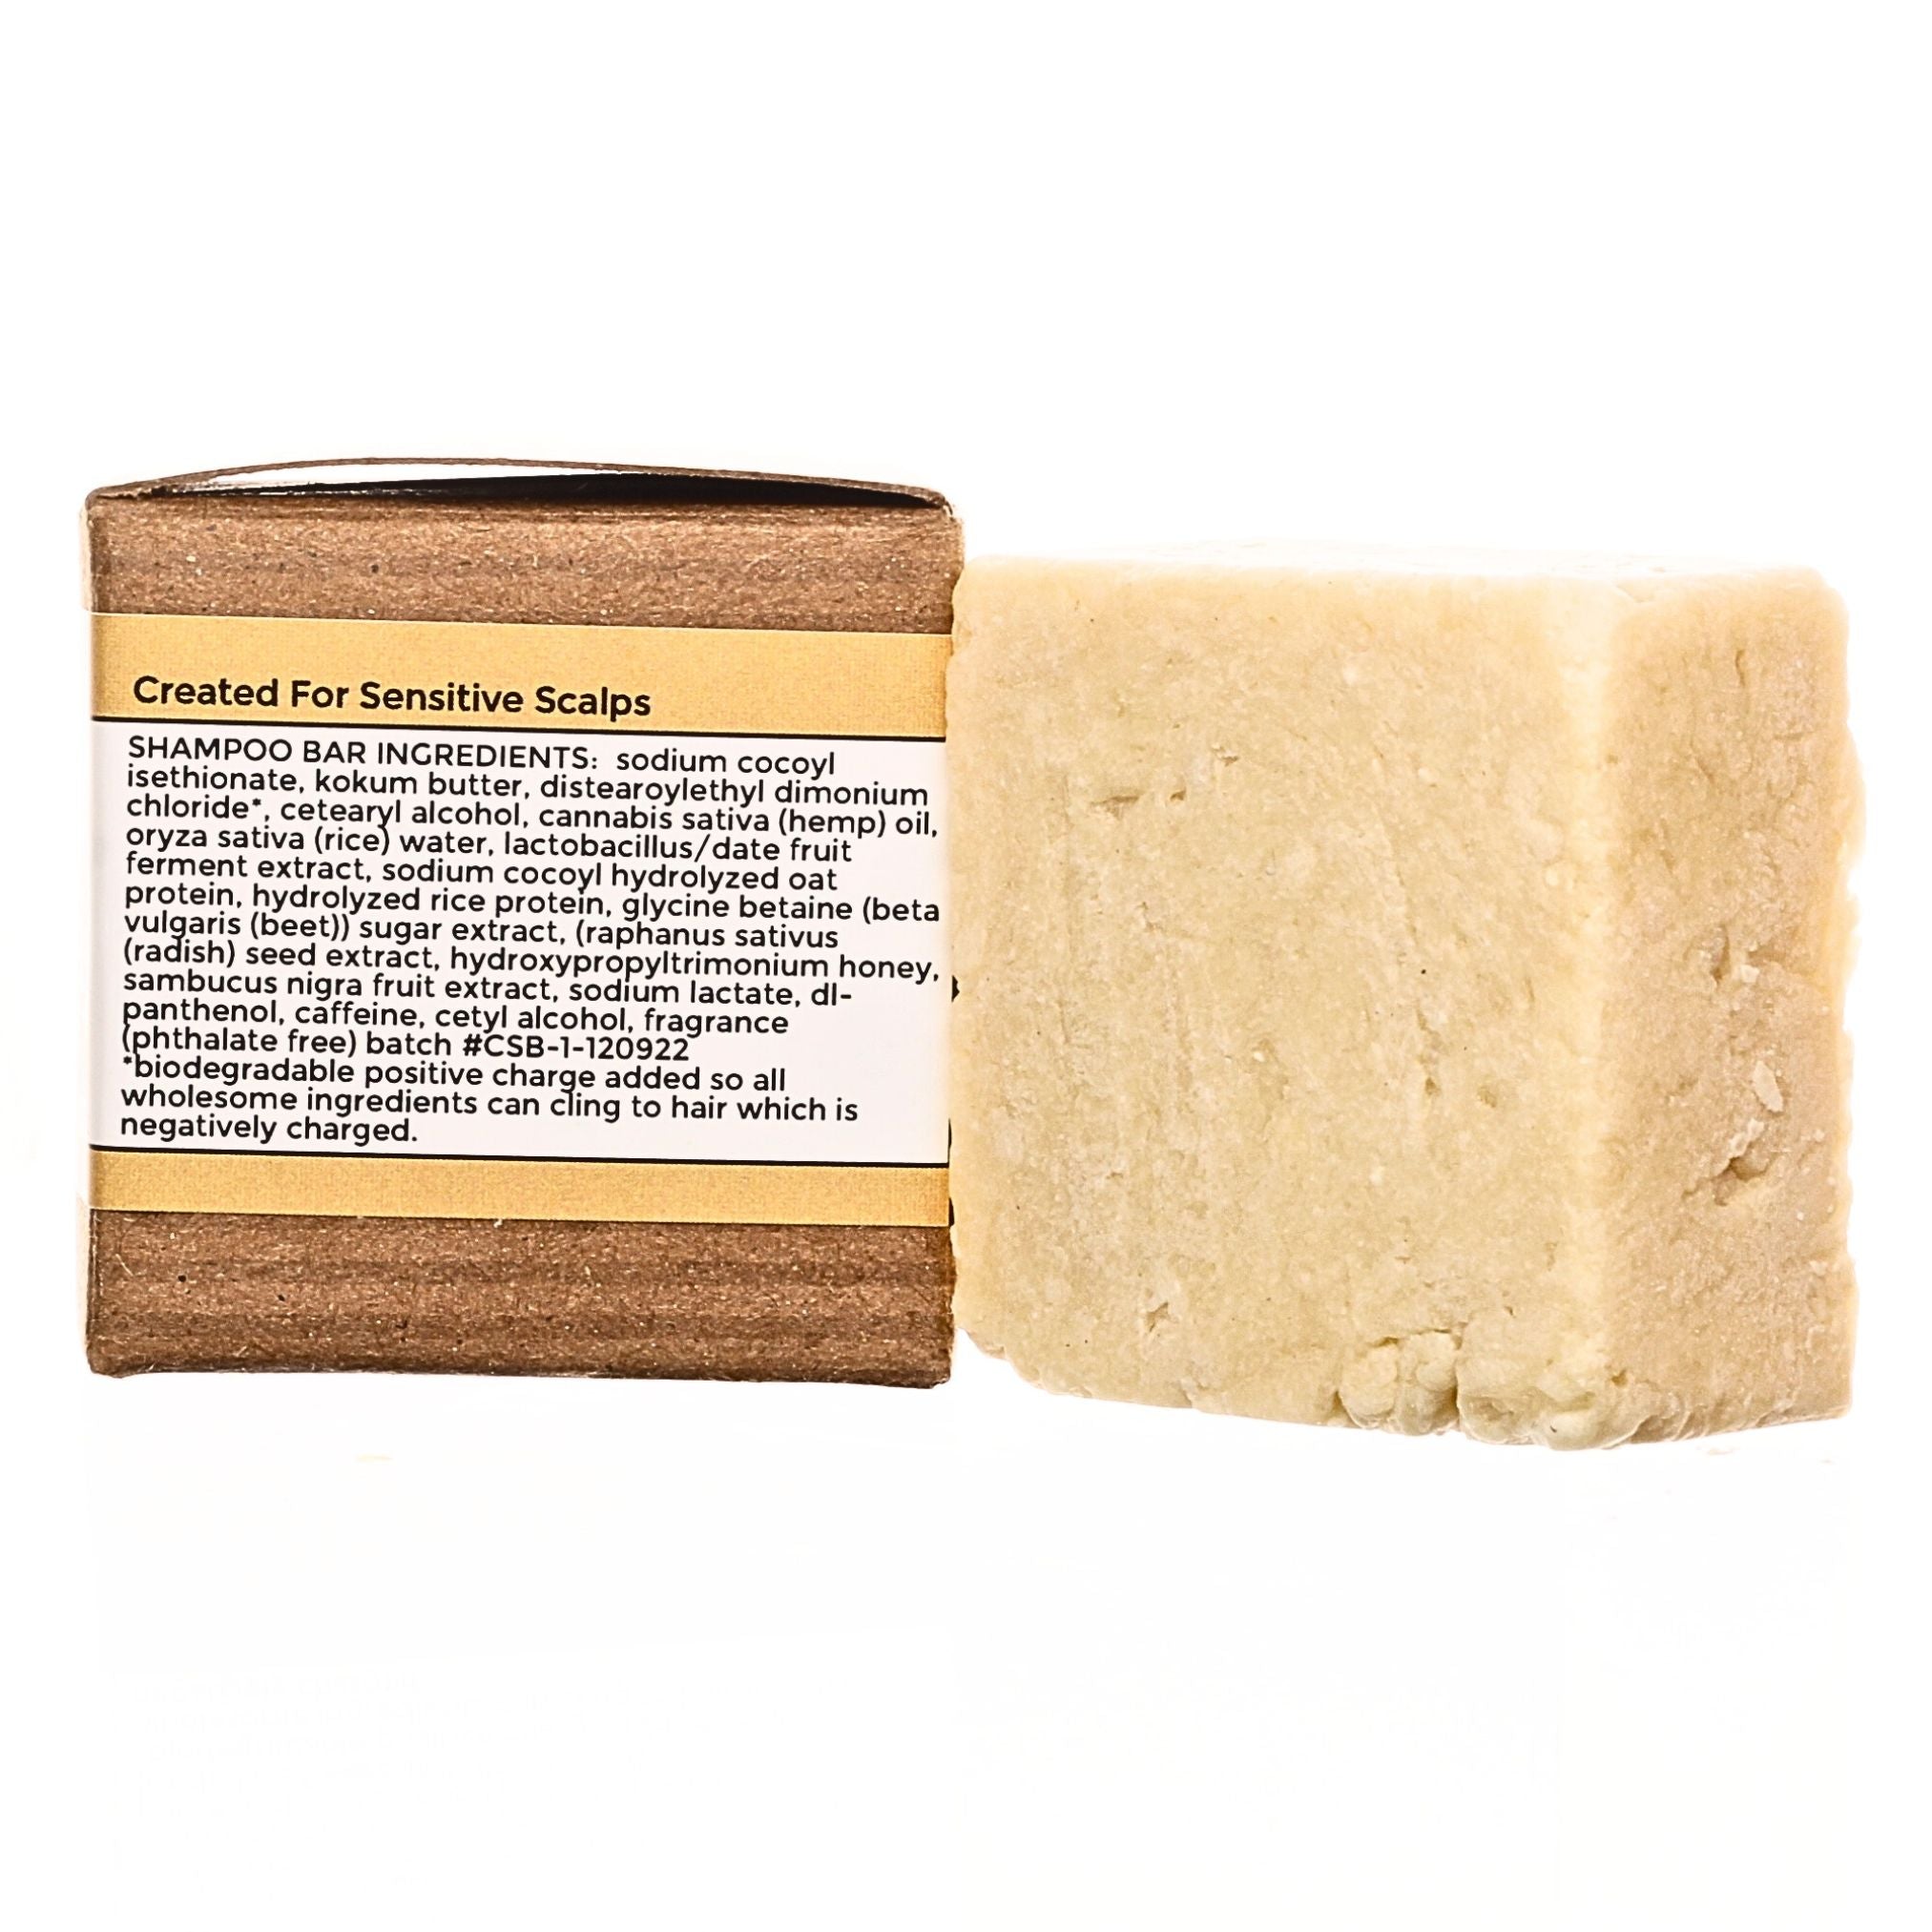 Farmbody Caffeinated Solid Shampoo Bar Ingredients for hair growth of thin hair after chemotherapy